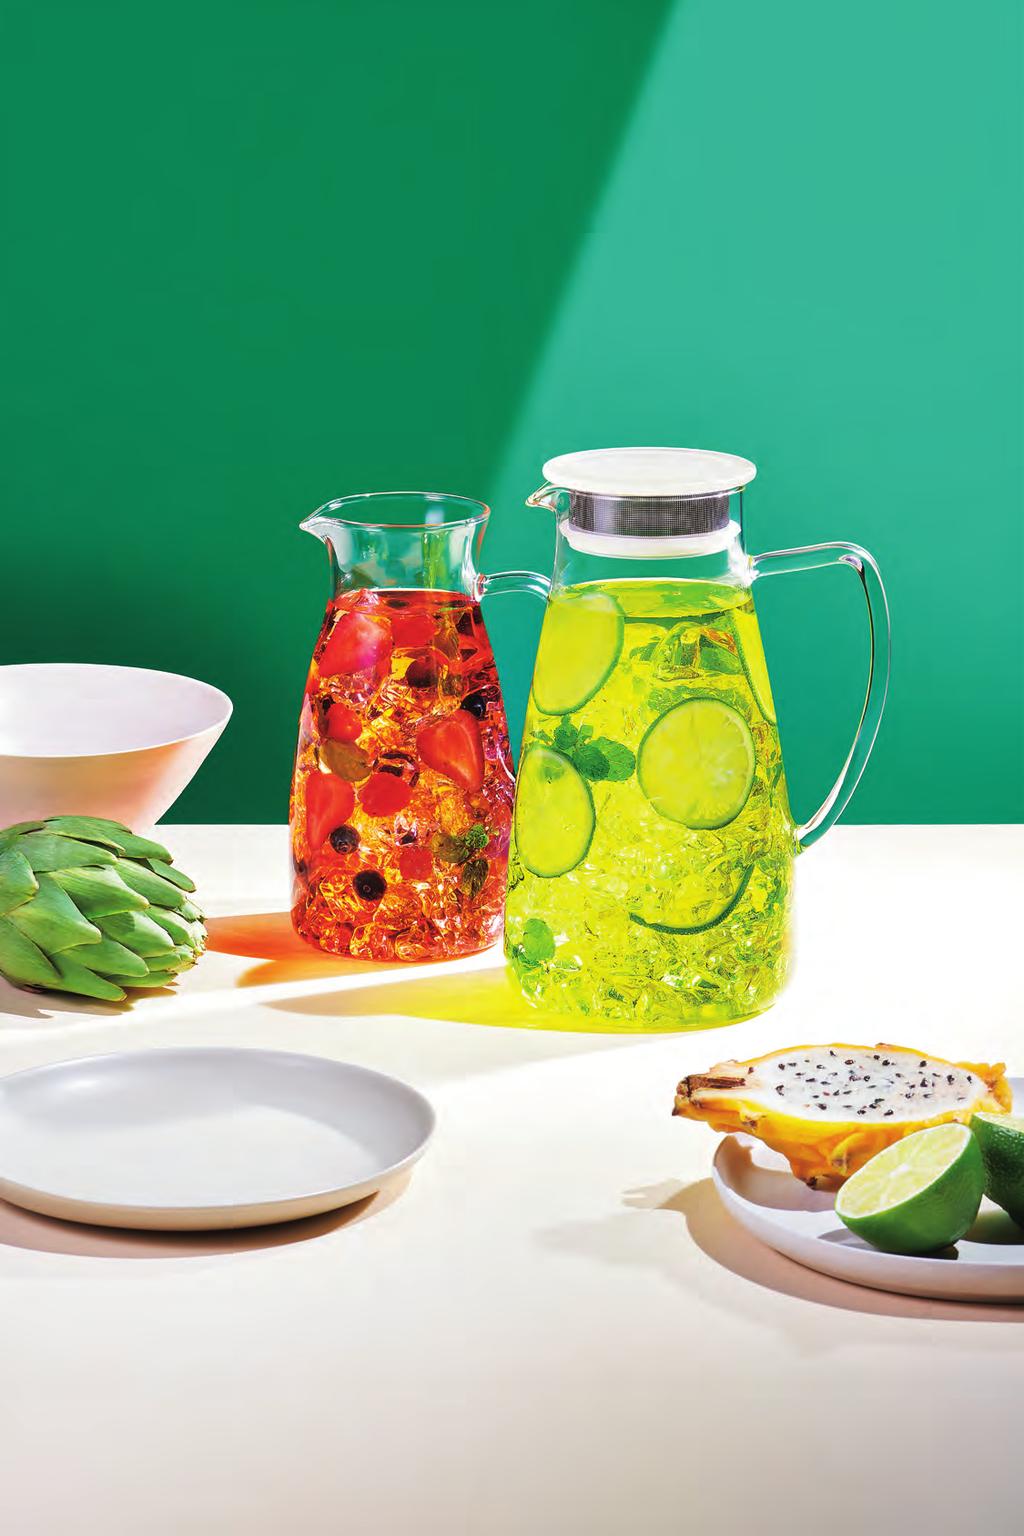 Heat-resistant iced tea jug series are ideal for gatherings Cool and refreshing way to make your favorite iced tea